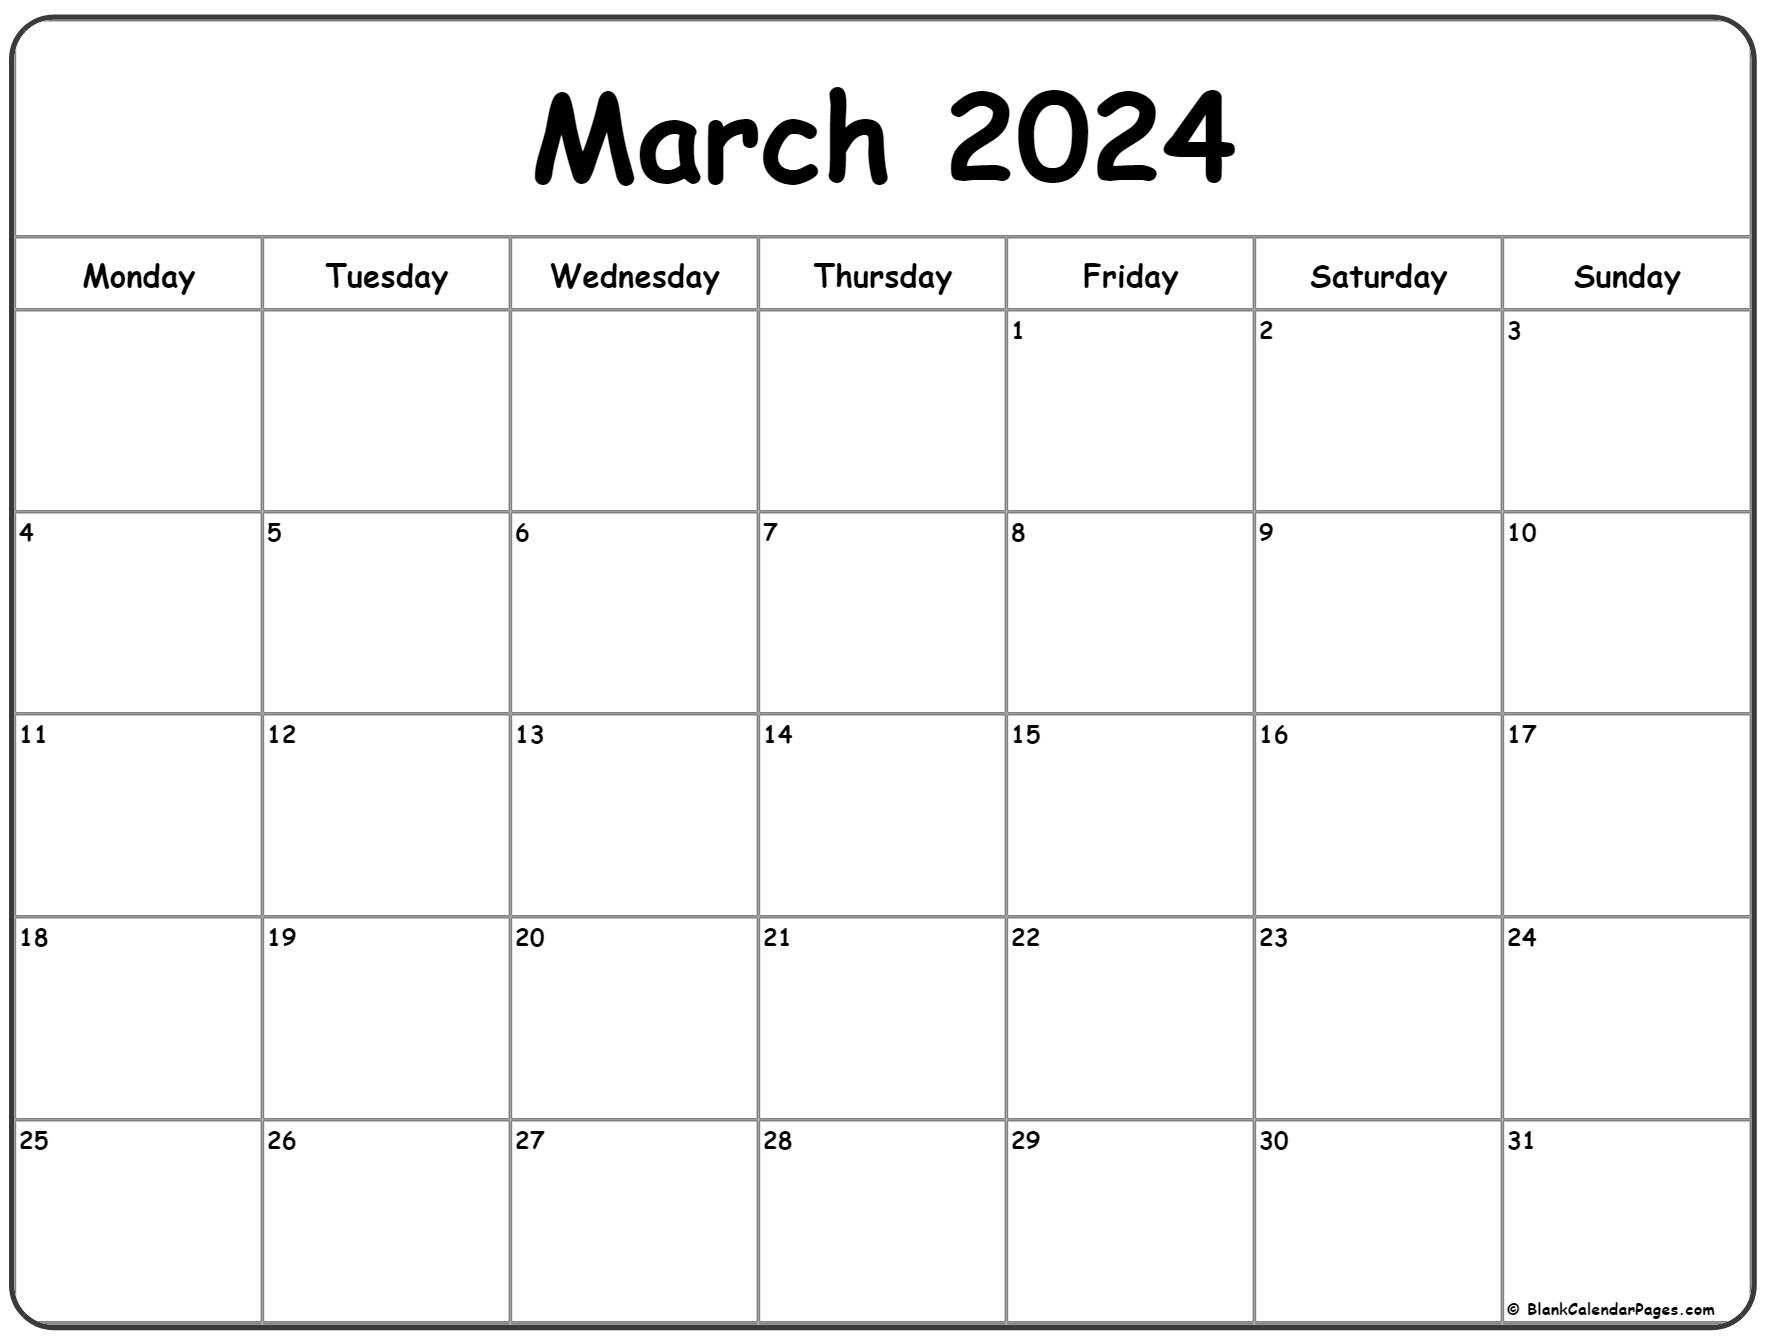 March 2022 Schedule March 2022 Monday Calendar | Monday To Sunday